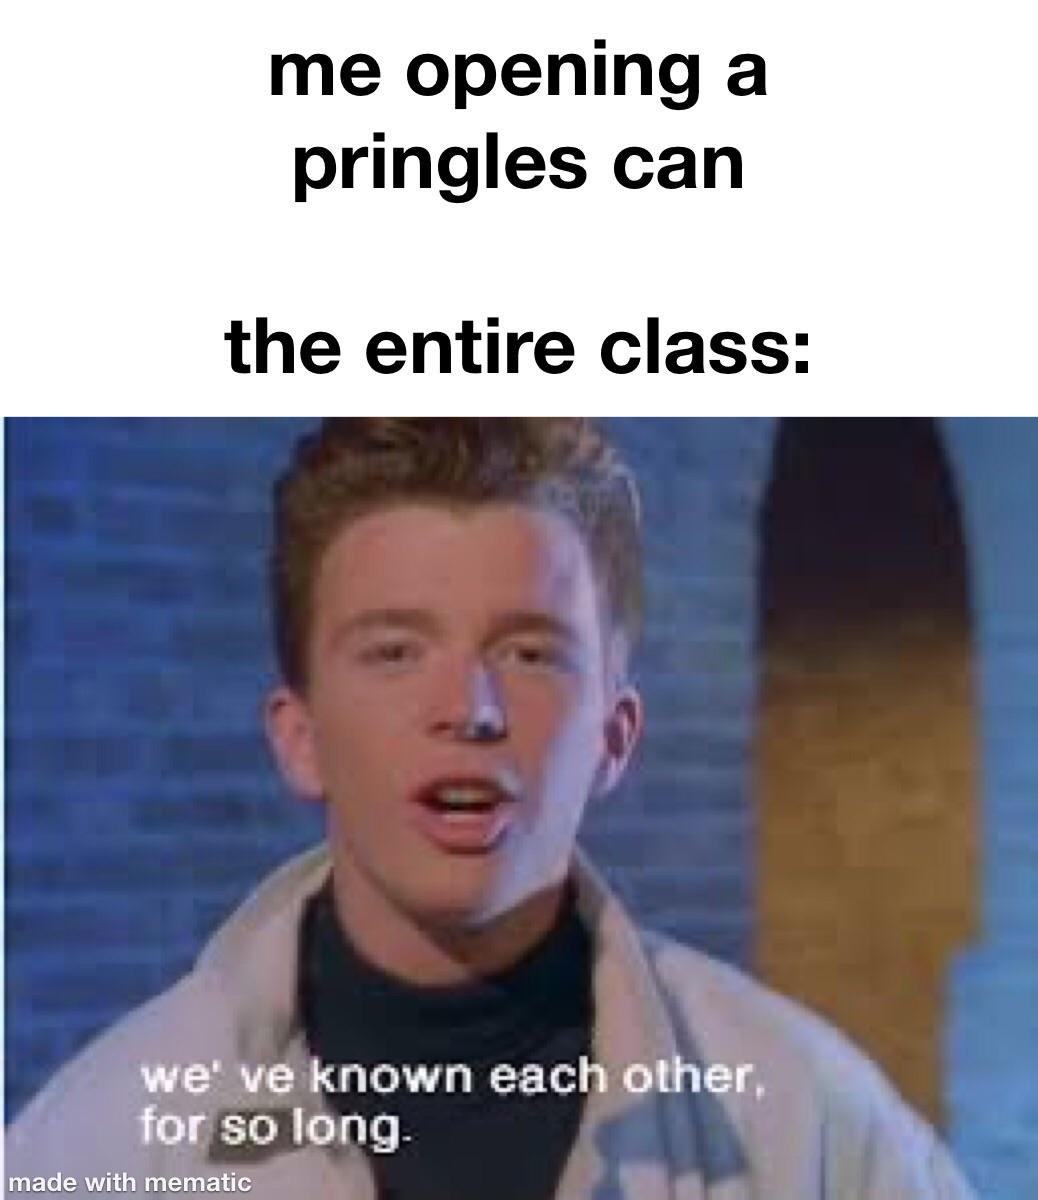 you know the rules and so do - me opening a pringles can the entire class we' ve known each other. for so long made with mematic